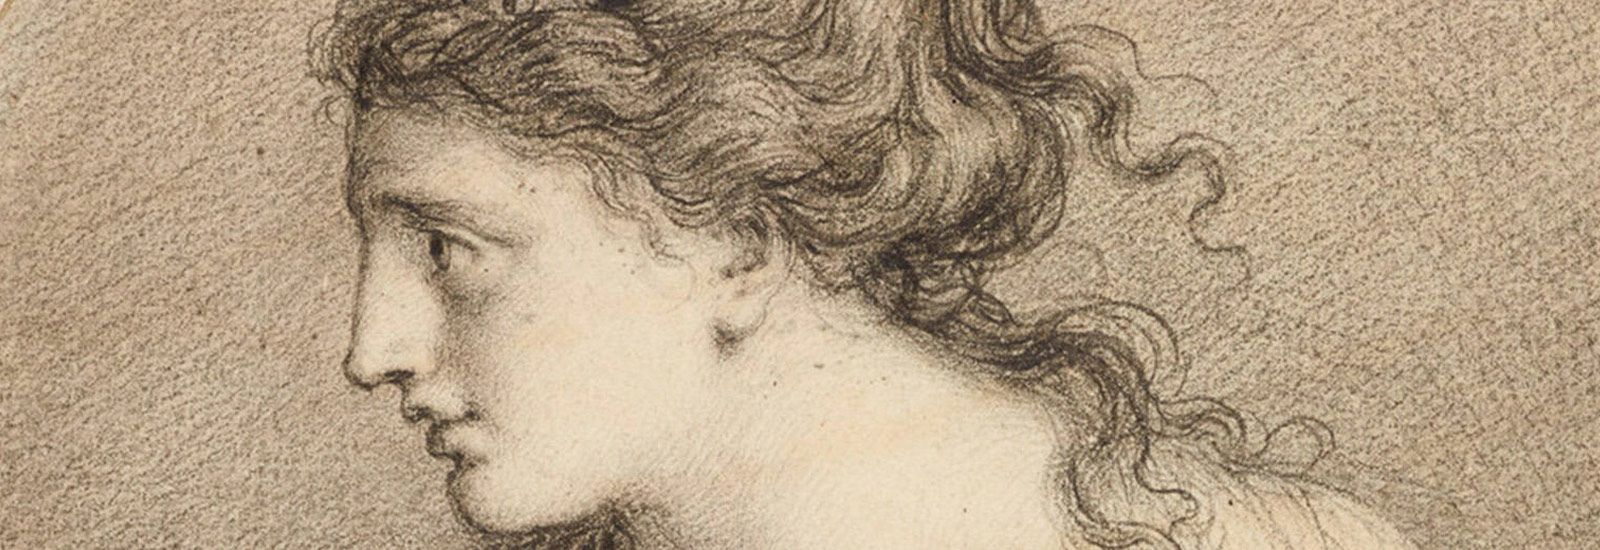 A detail from The Tragic Muse